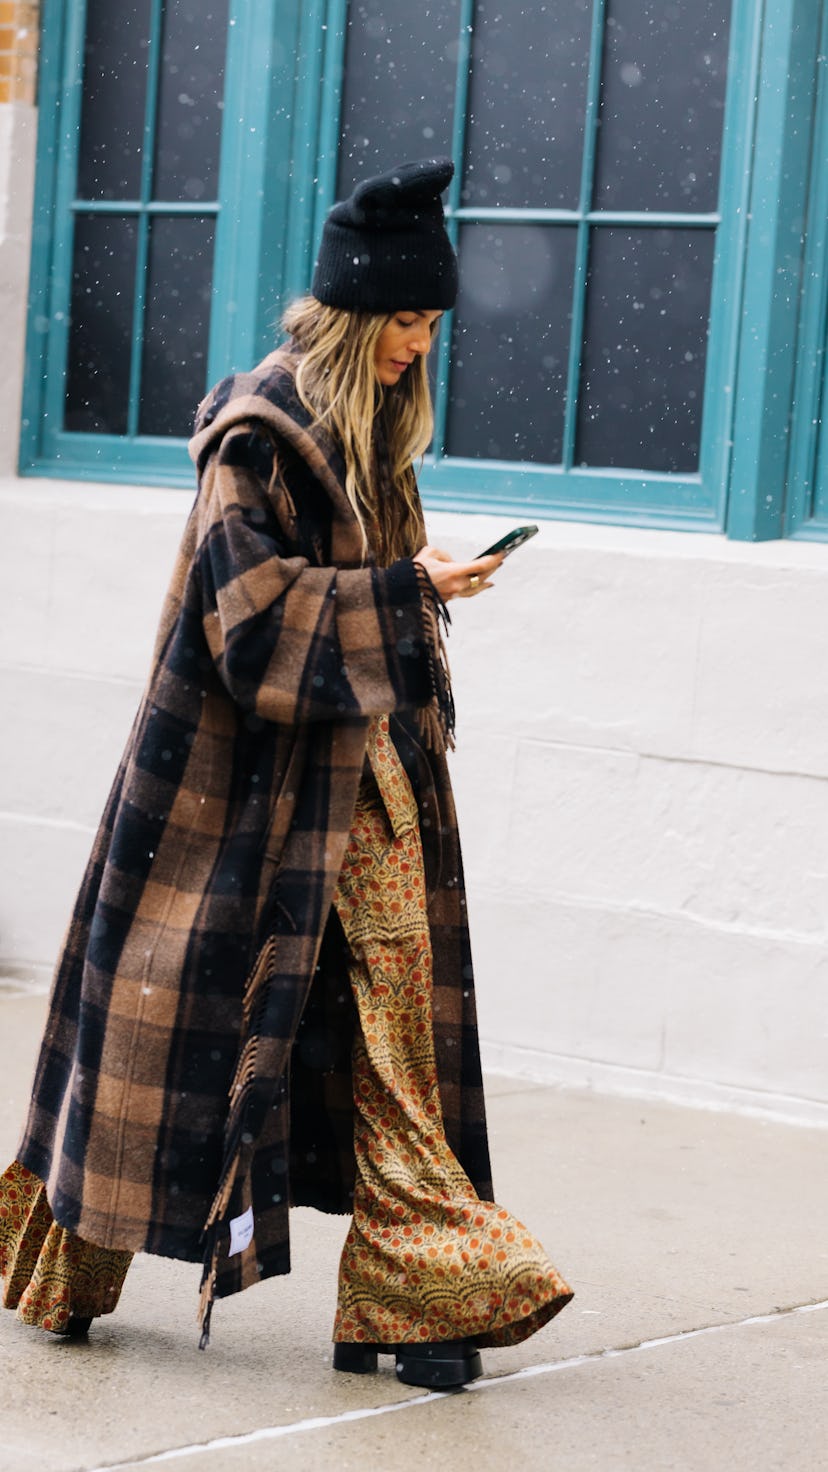 NYFW street style included statement coats 